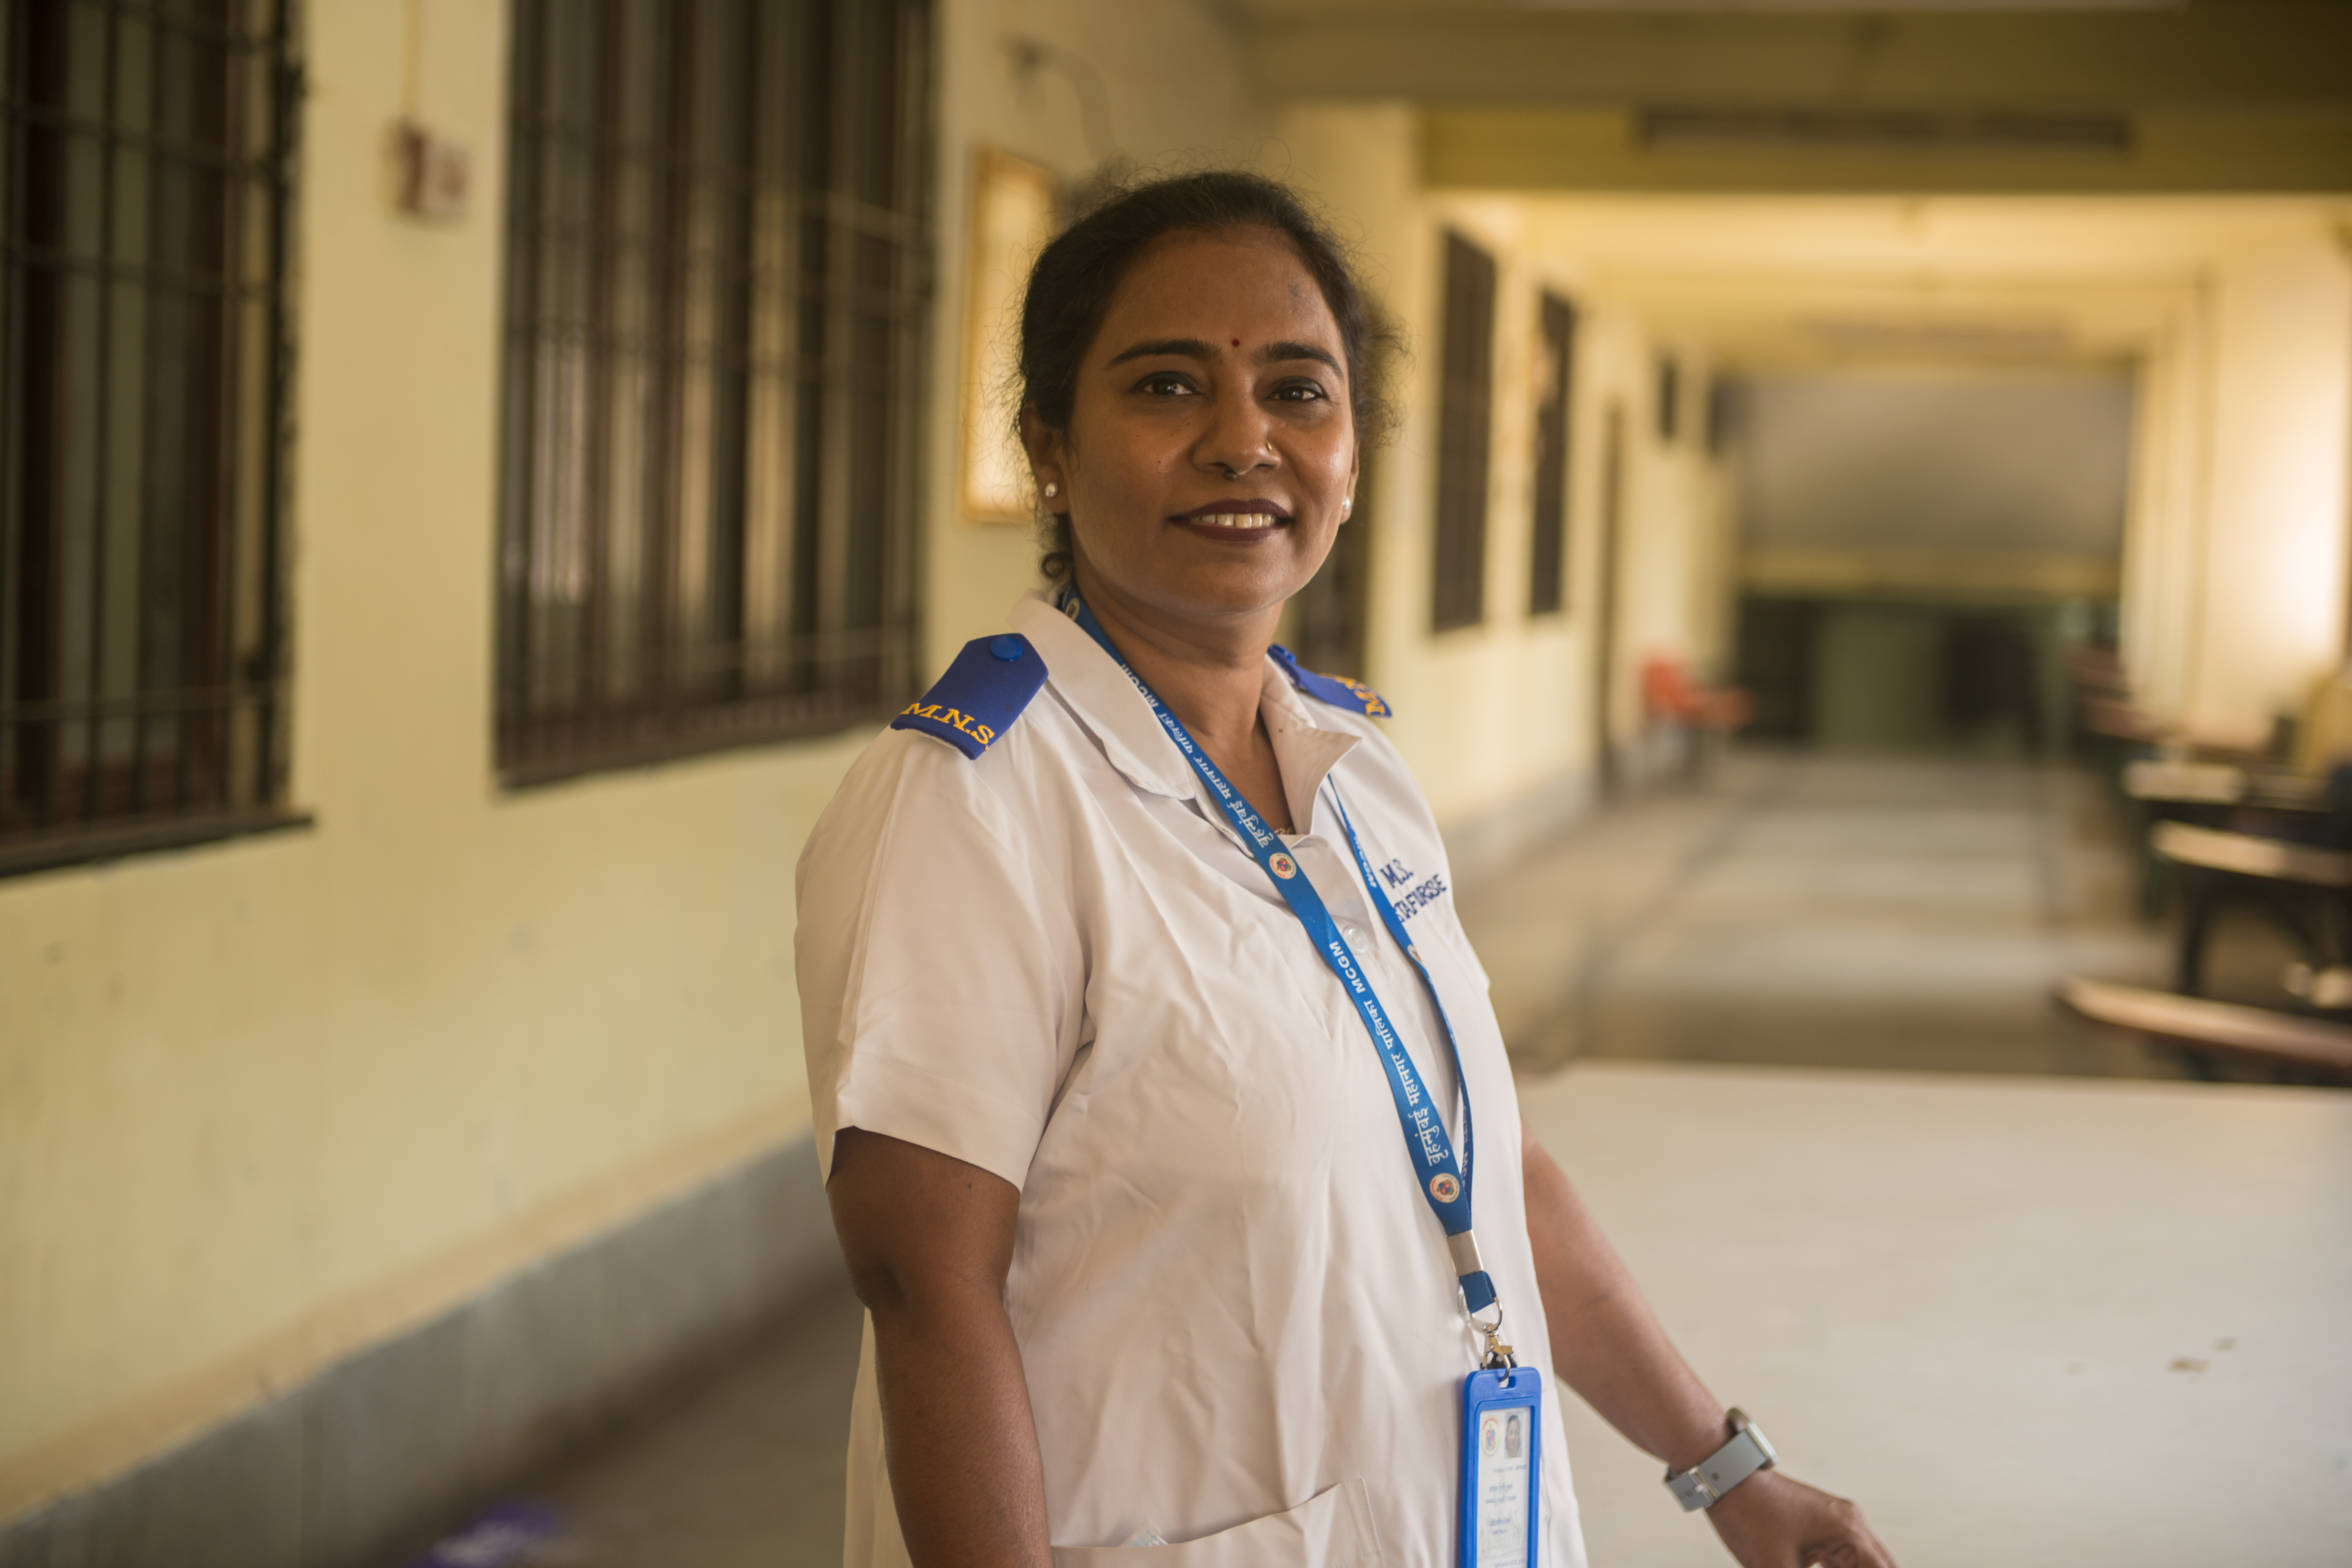 A nurse in India wearing a white uniform and a badge stands confidently and smiles.